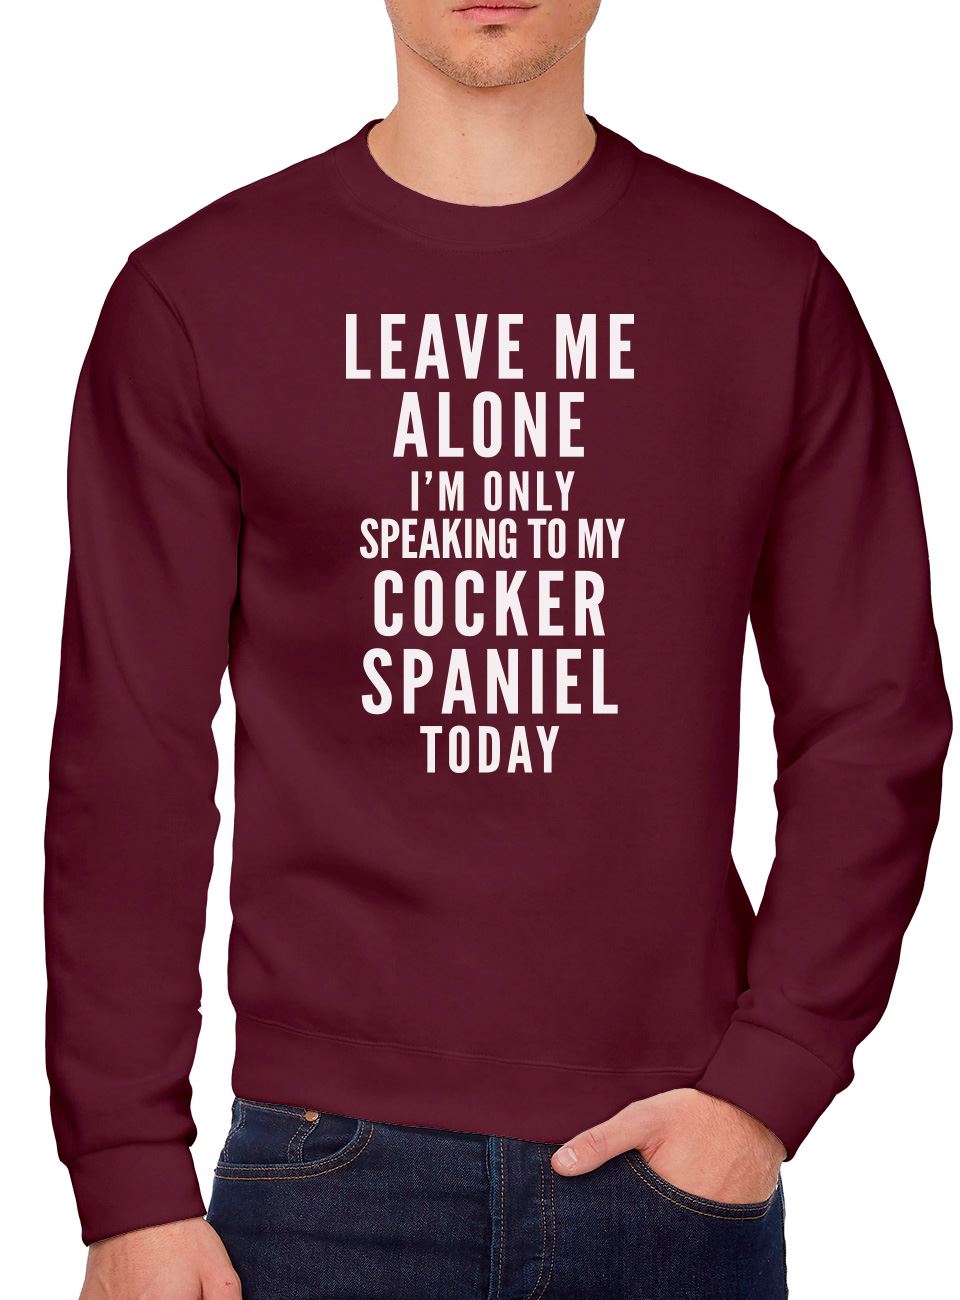 Leave Me Alone I'm Only Talking To My Cocker Spaniel - Youth & Mens Sweatshirt